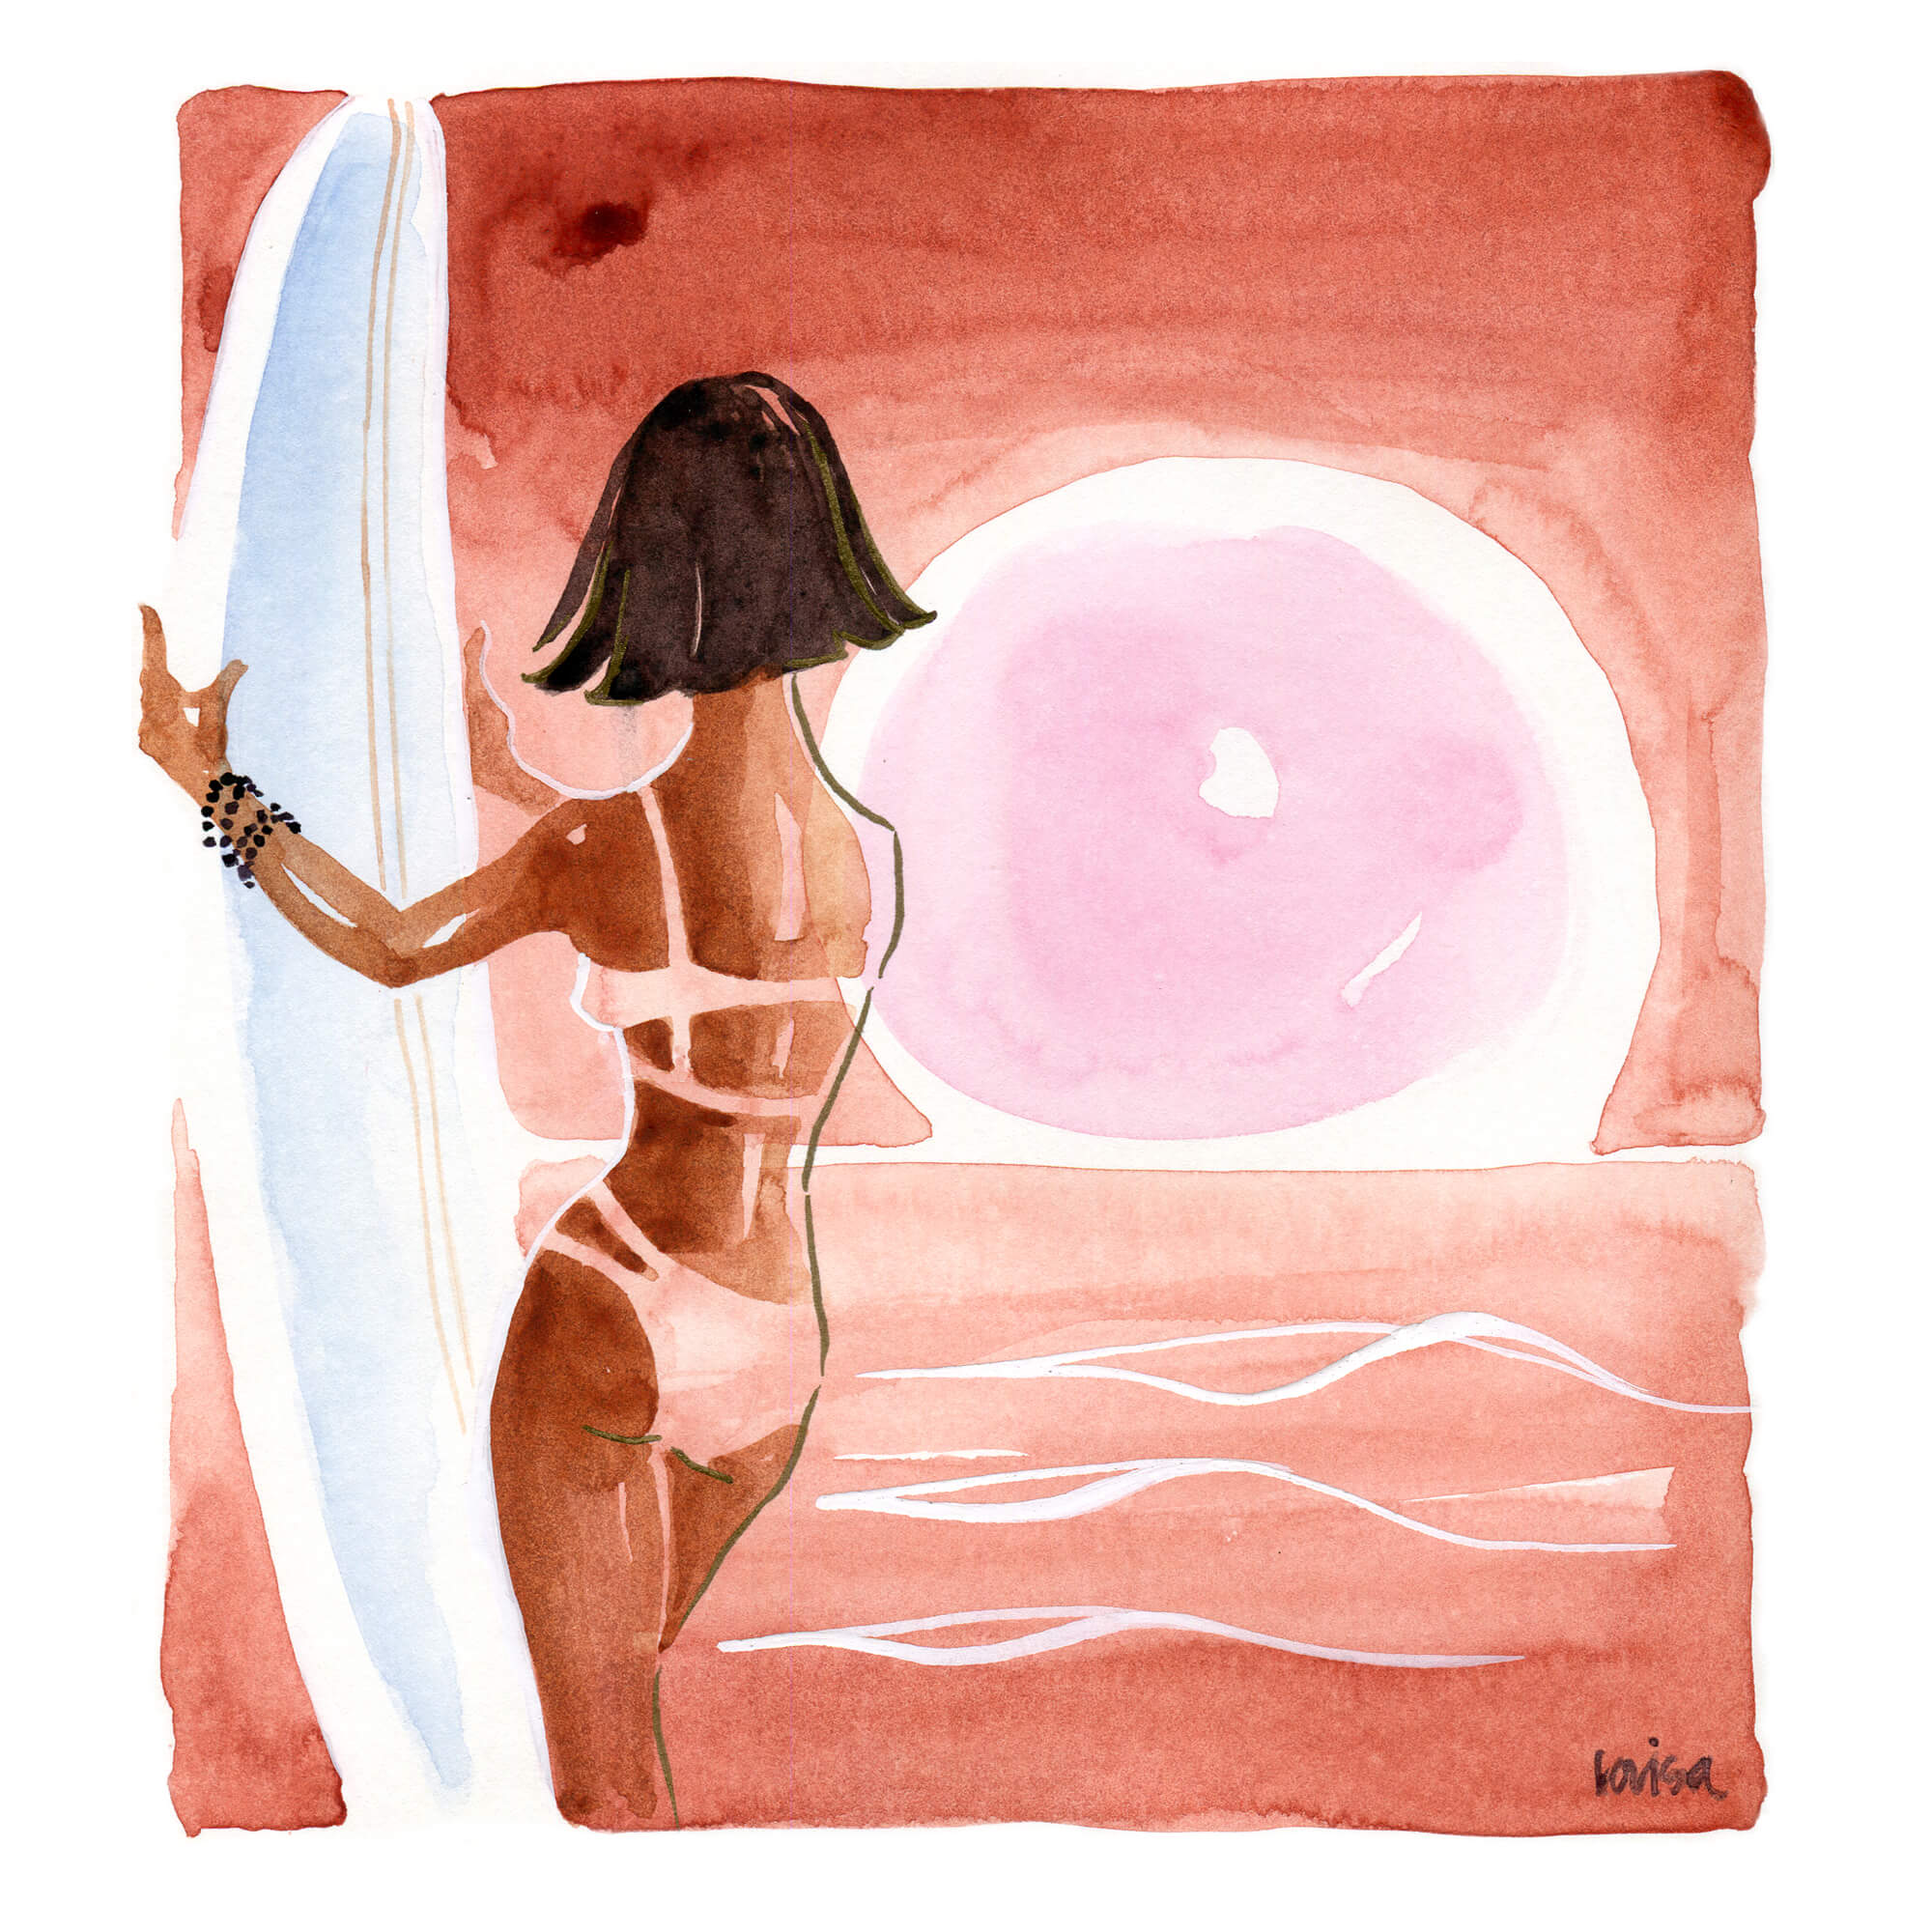 A paper giclée print of a watercolor artwork featuring a woman holding a surfboard while enjoying the sunset view by Hawaii artist Lovisa Oliv